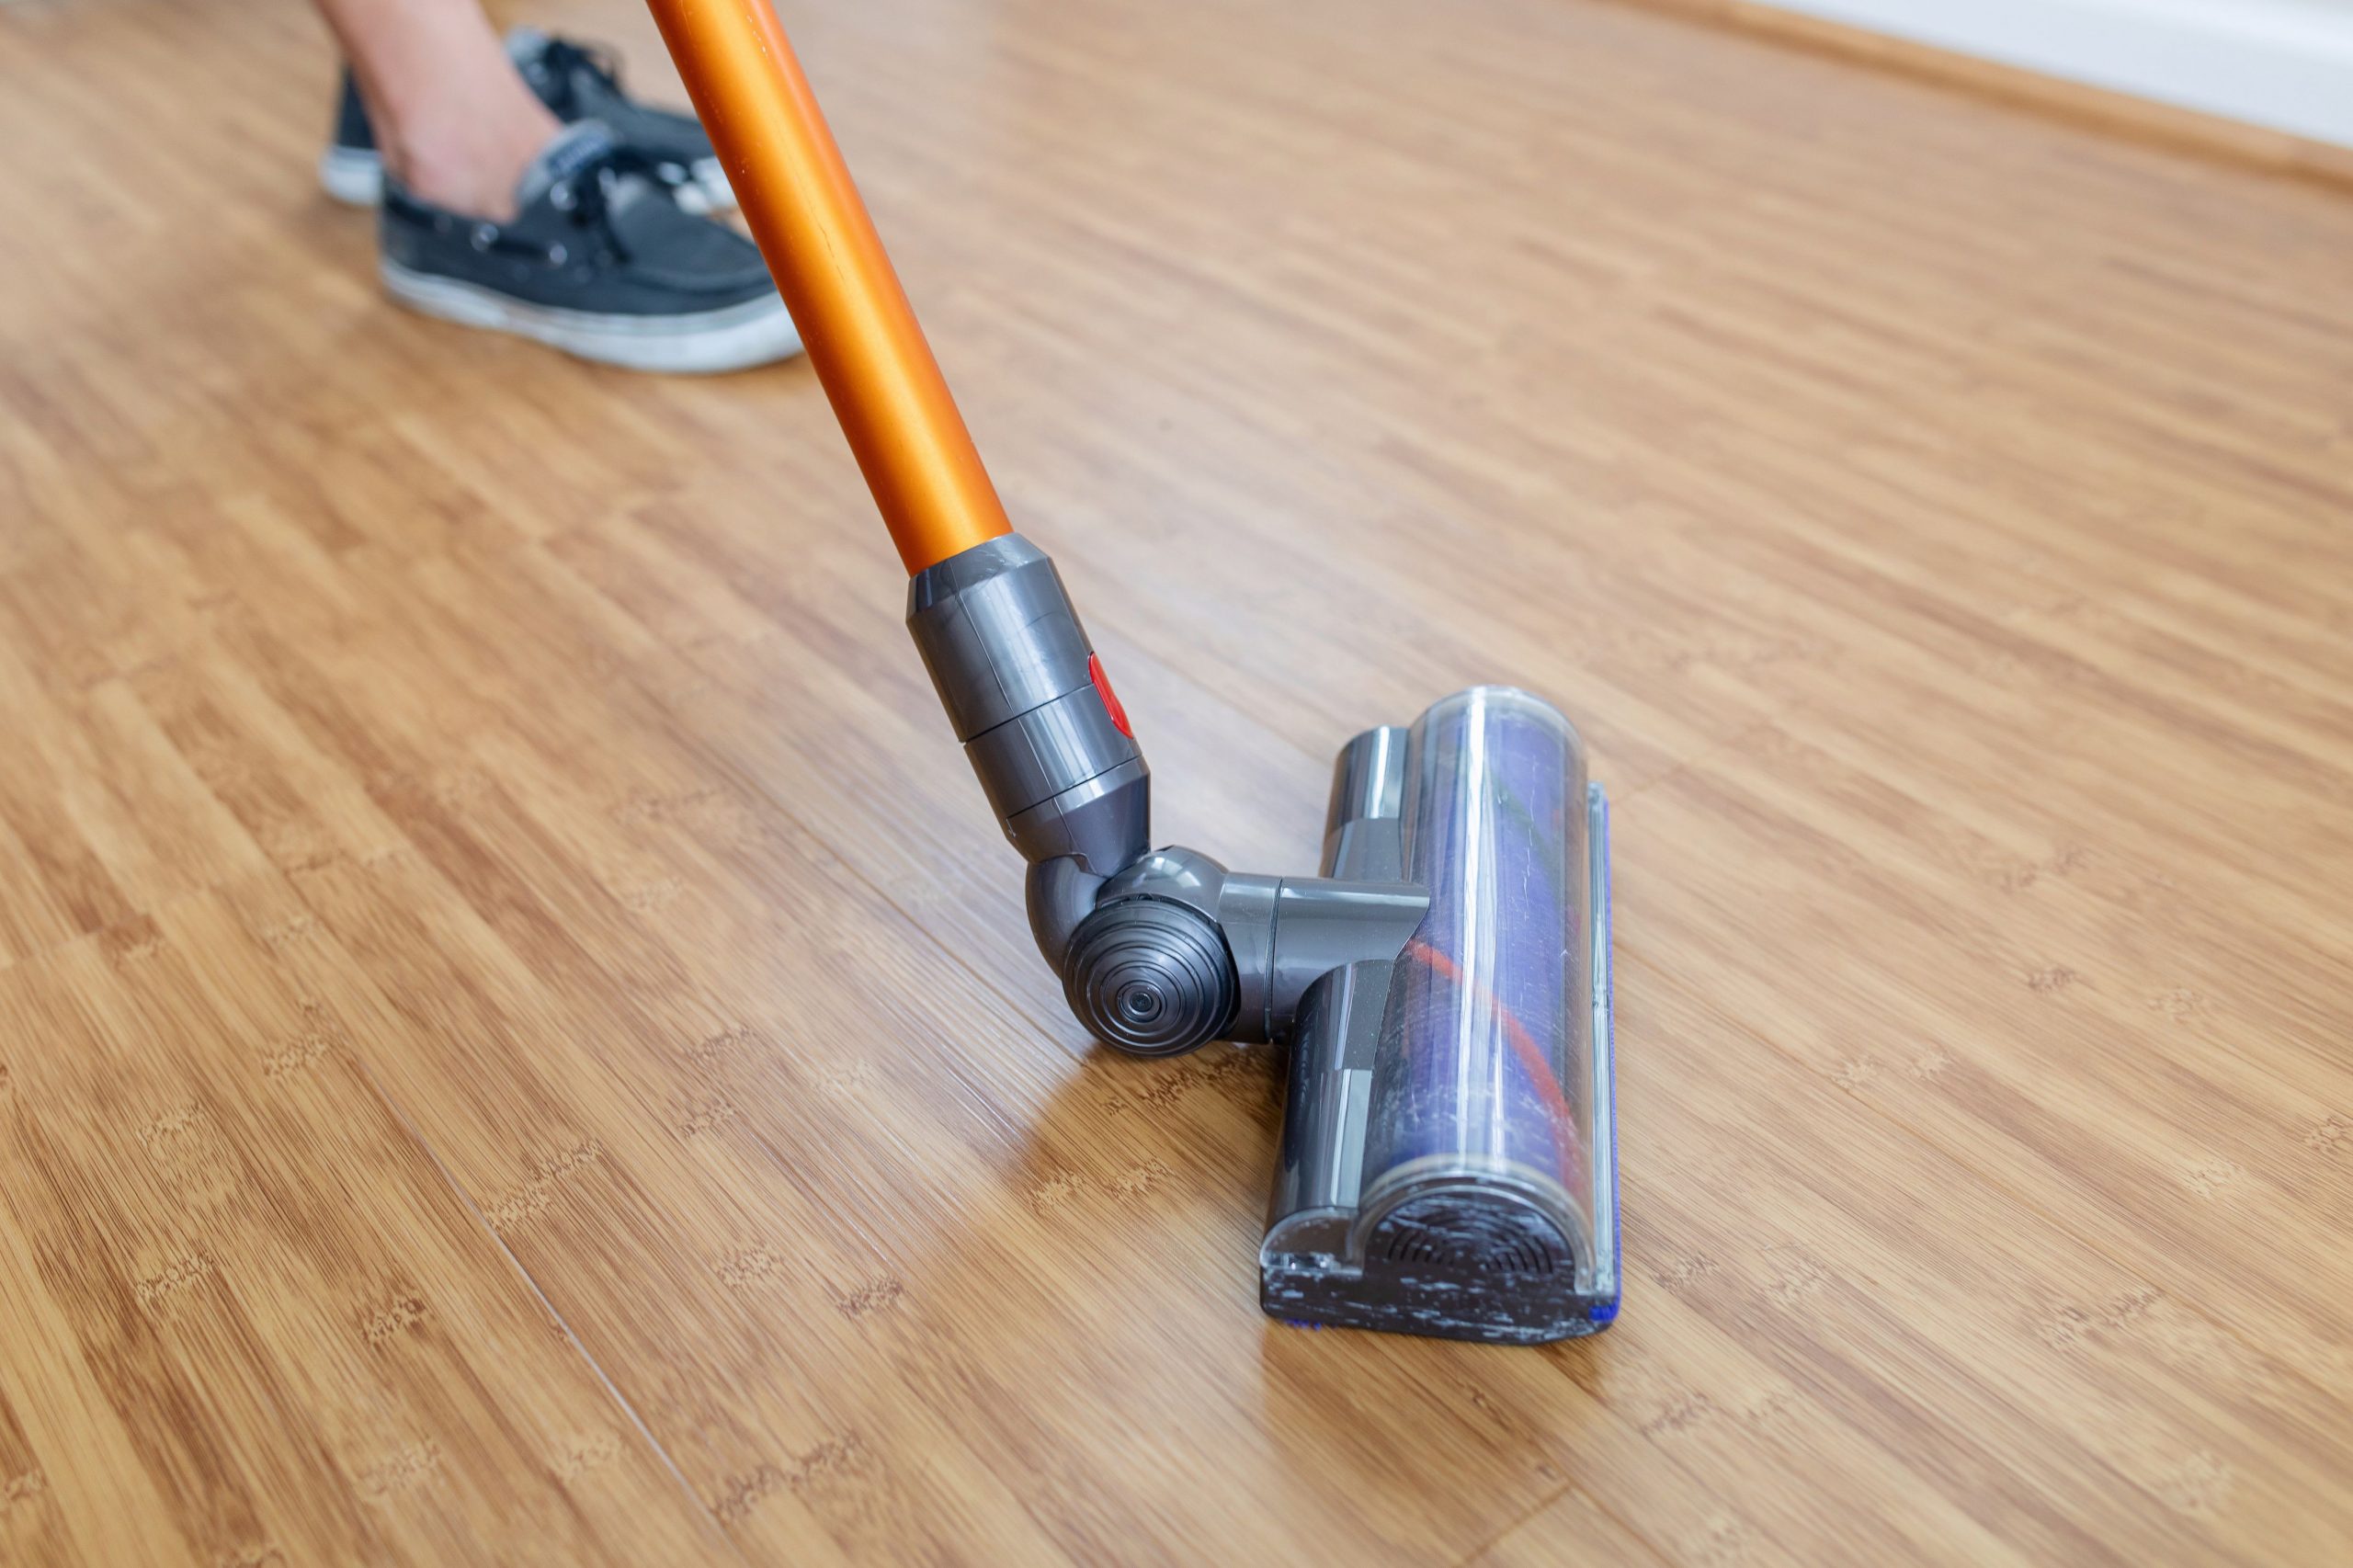 Professional Carpet Cleaning Services for Spotless Floors